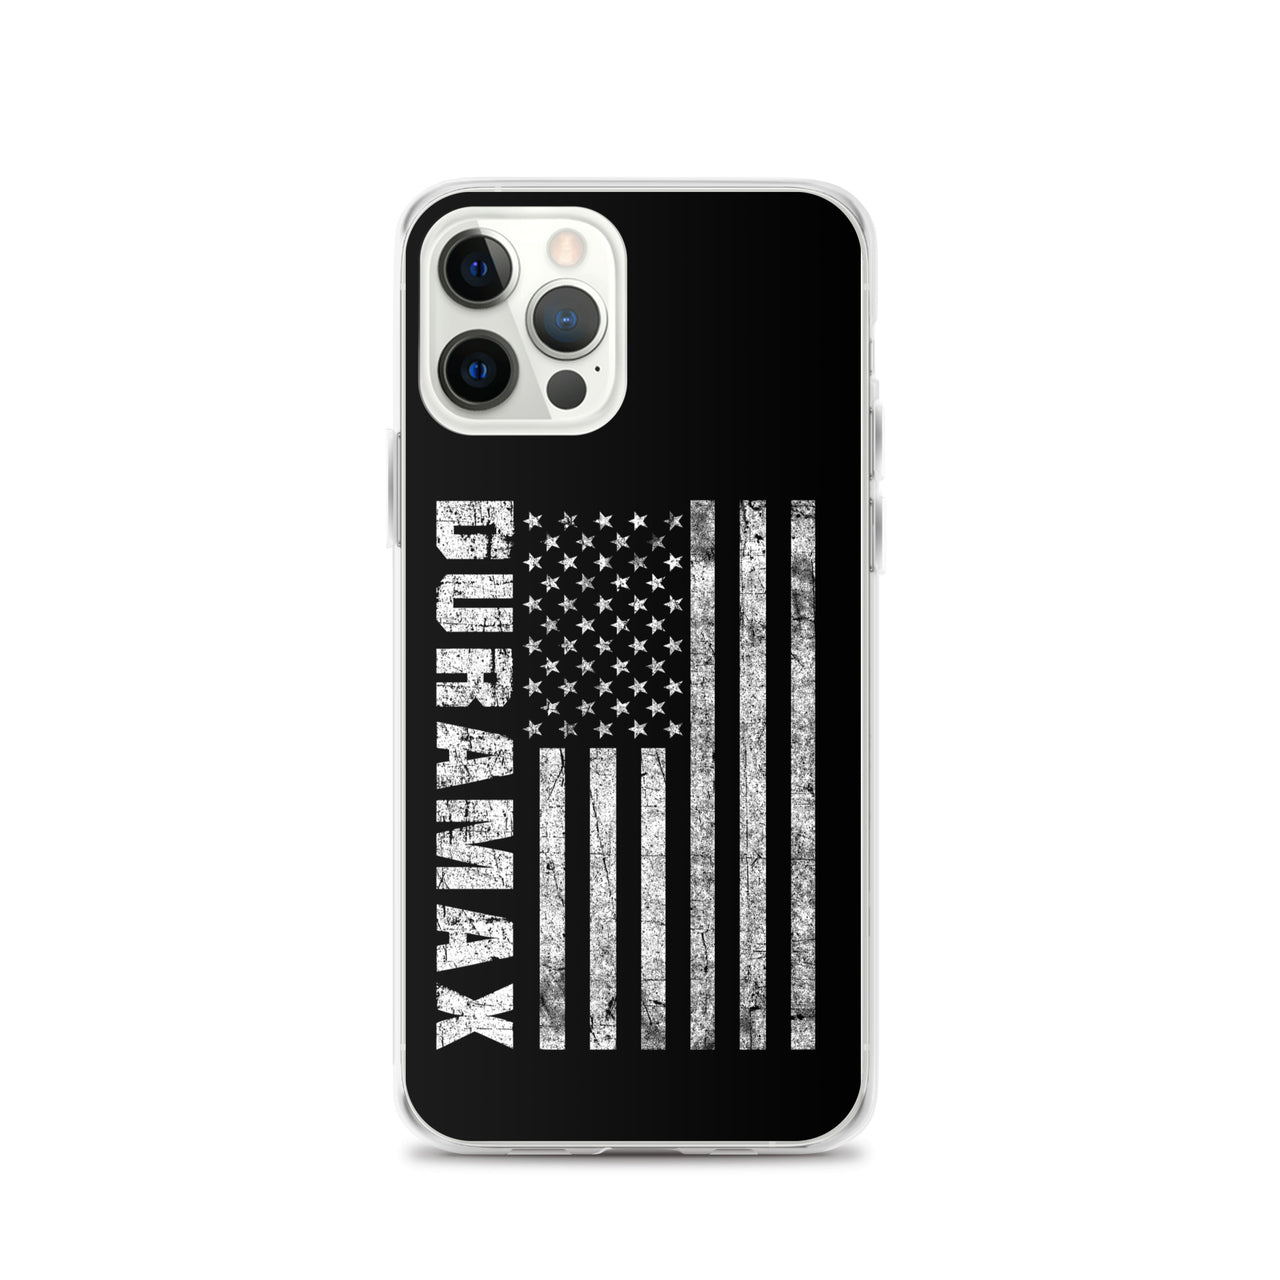 Duramax American Flag Protective Phone Case - Fits iPhone 12